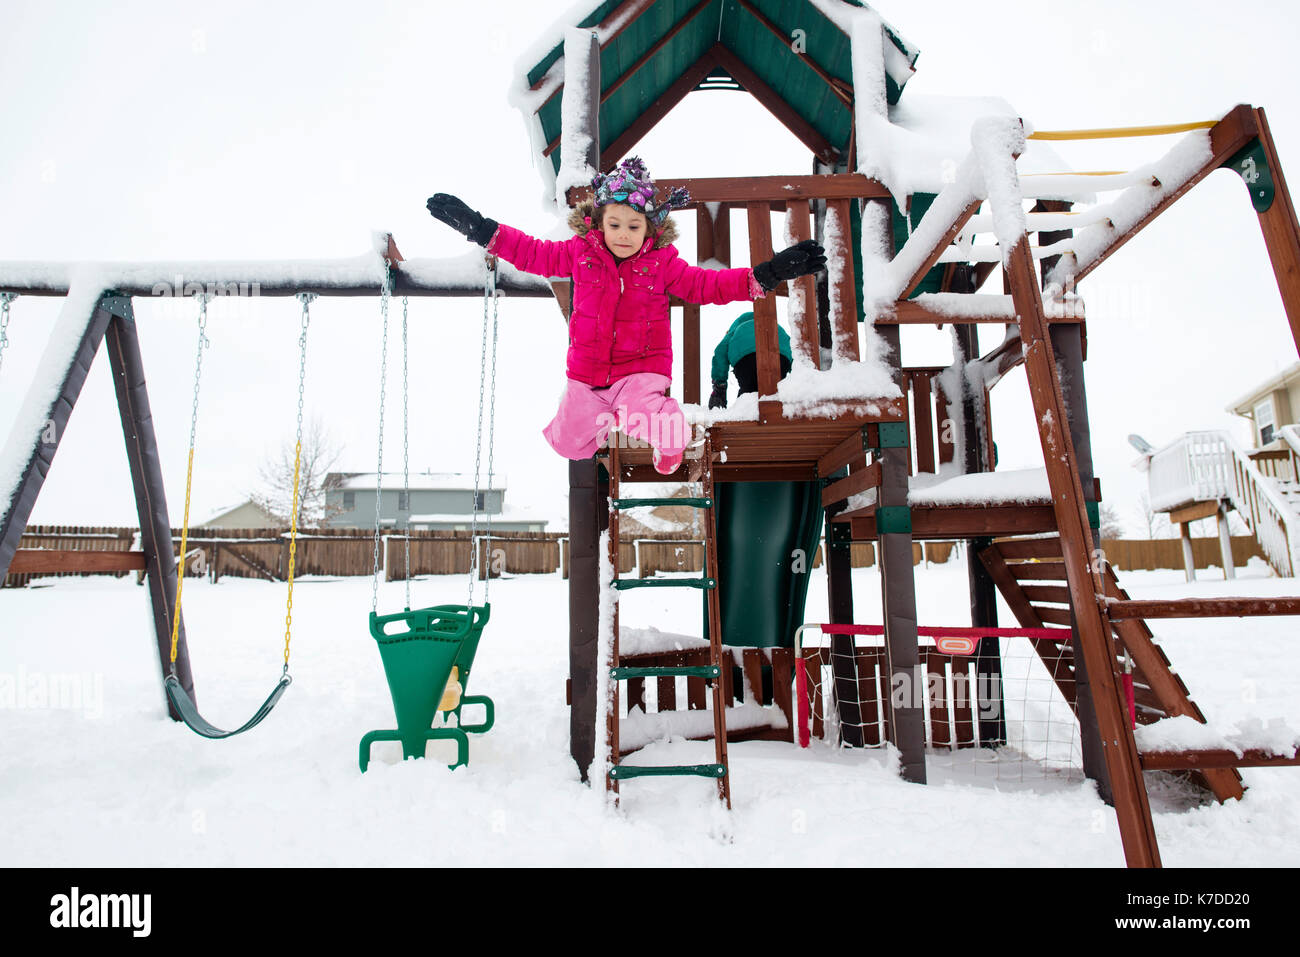 Playful girl jumping from outdoor play equipment at playground during winter Stock Photo